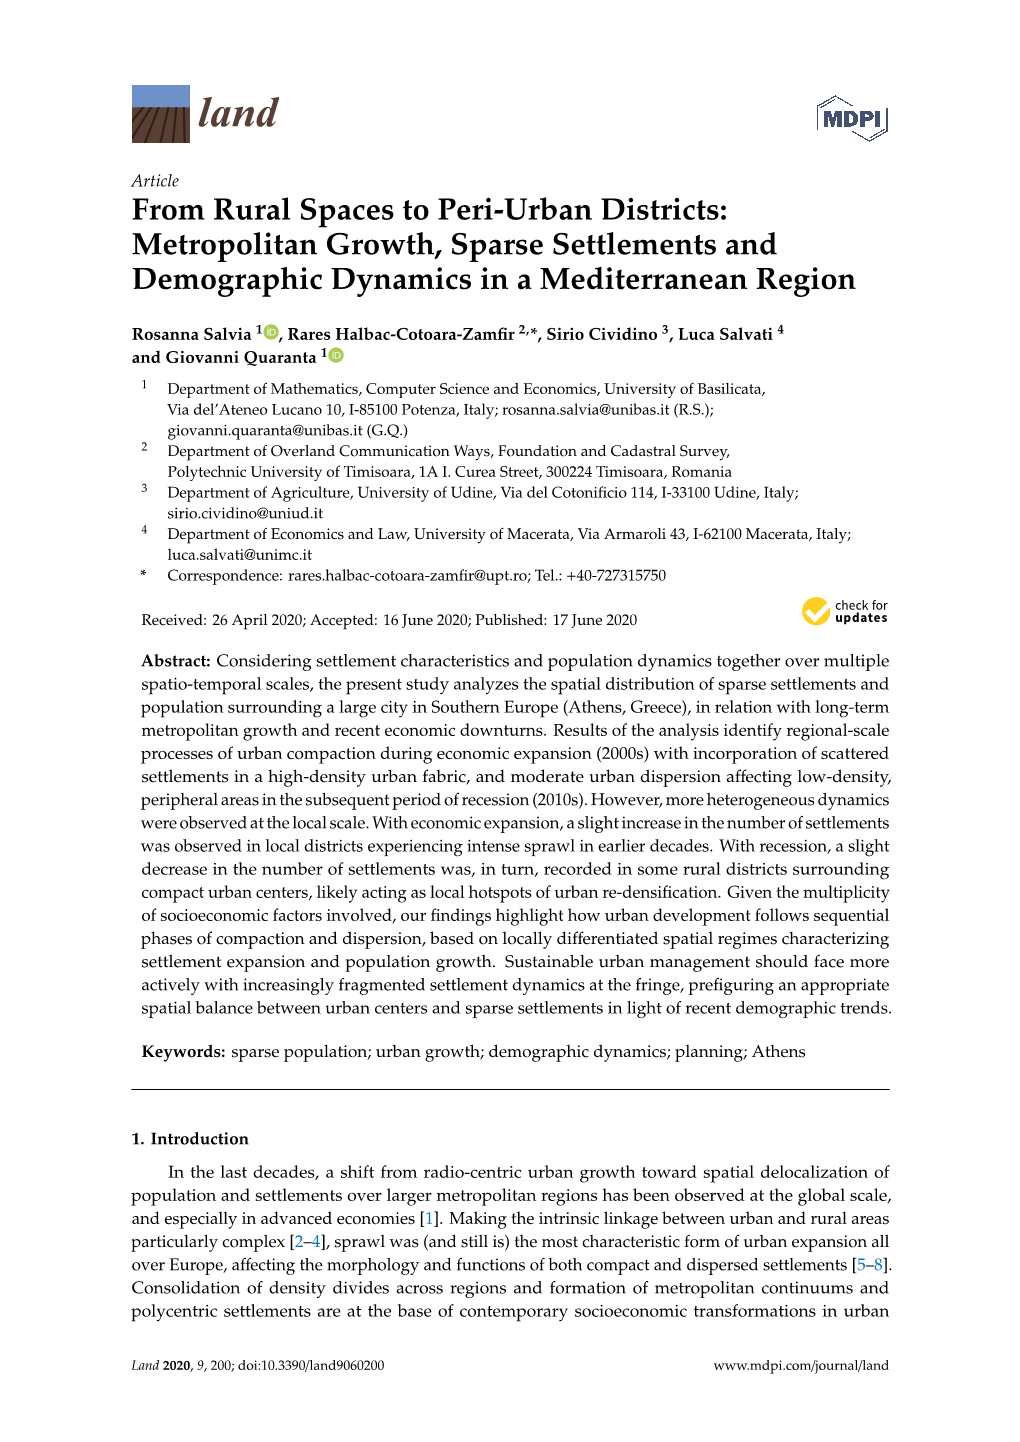 From Rural Spaces to Peri-Urban Districts: Metropolitan Growth, Sparse Settlements and Demographic Dynamics in a Mediterranean Region